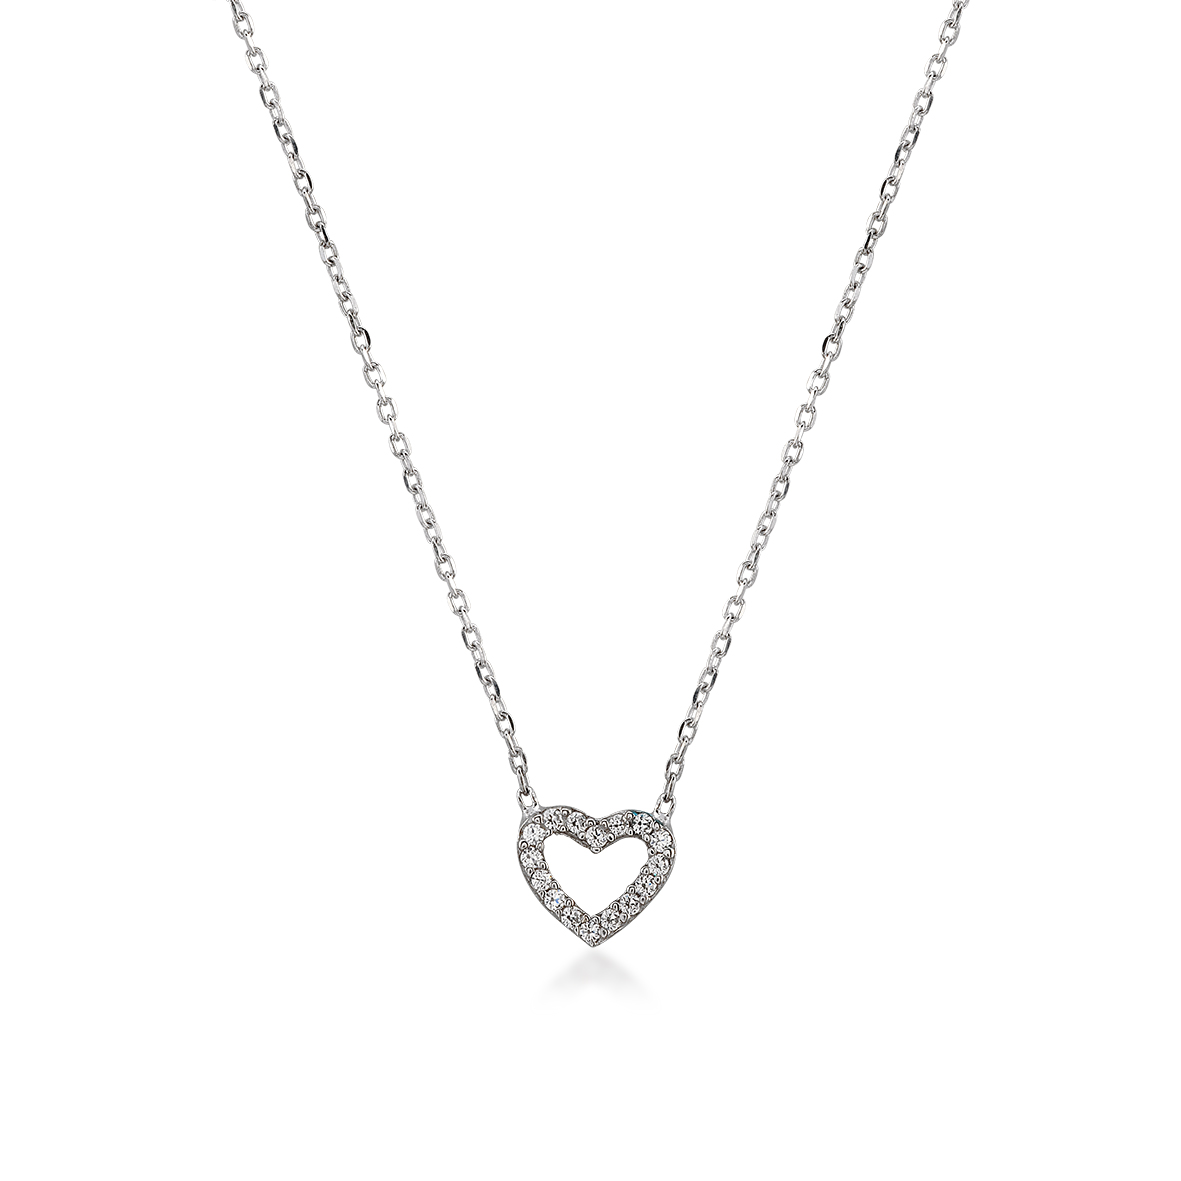 Cuore, Sterling Silver Necklace.